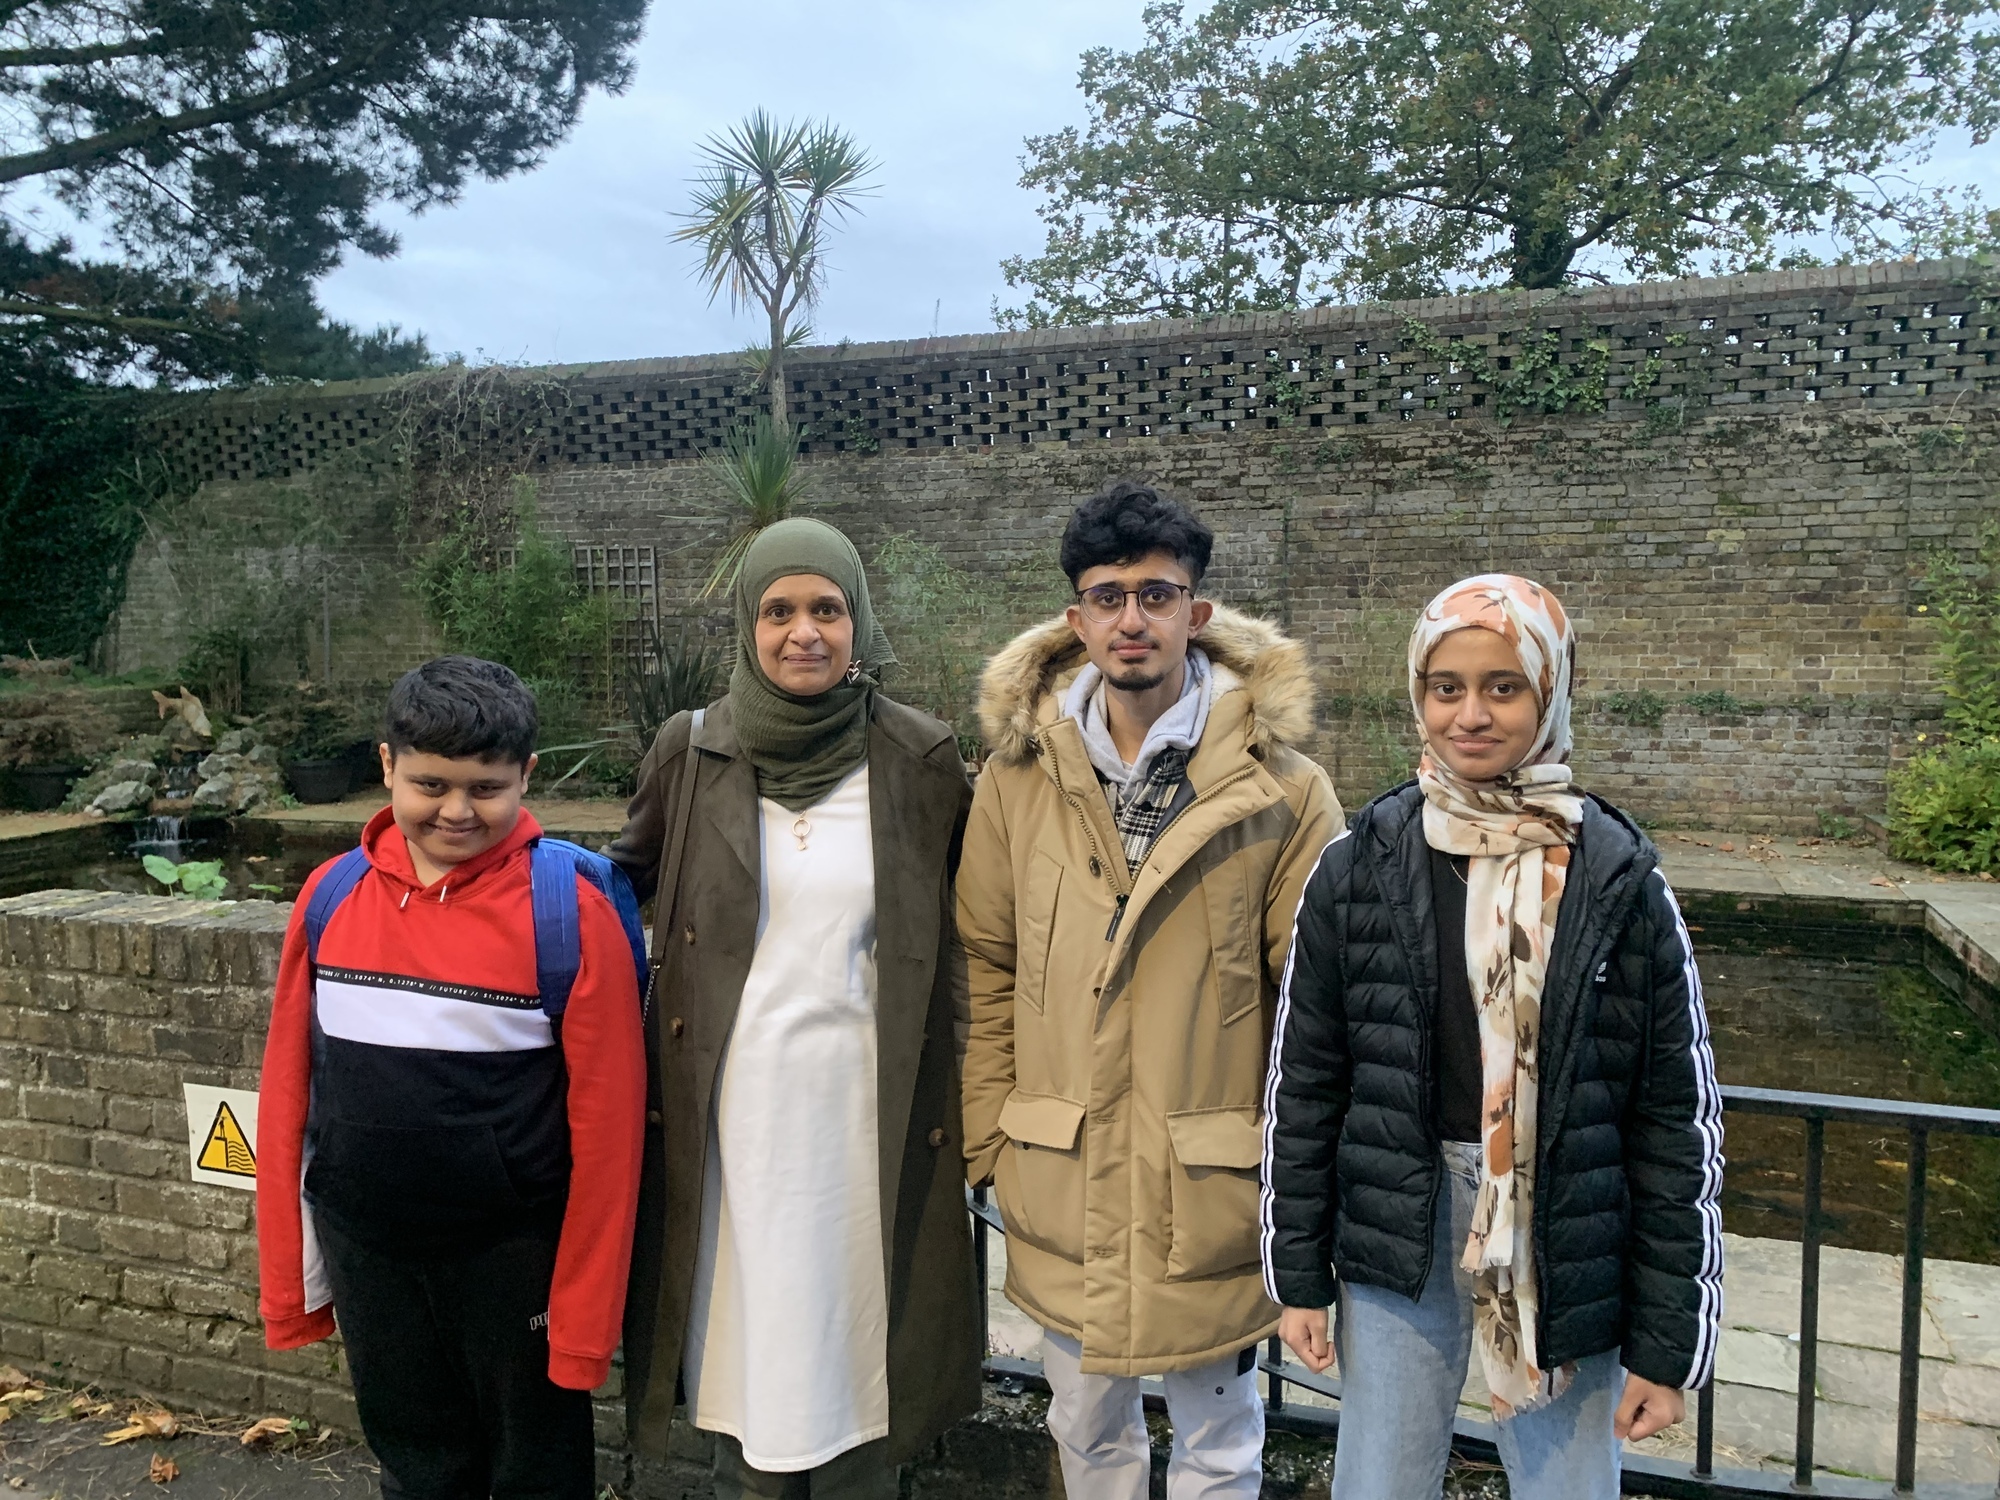 L-R Anees, Vanessa, Awais and Sabaa by the pond at the hospice